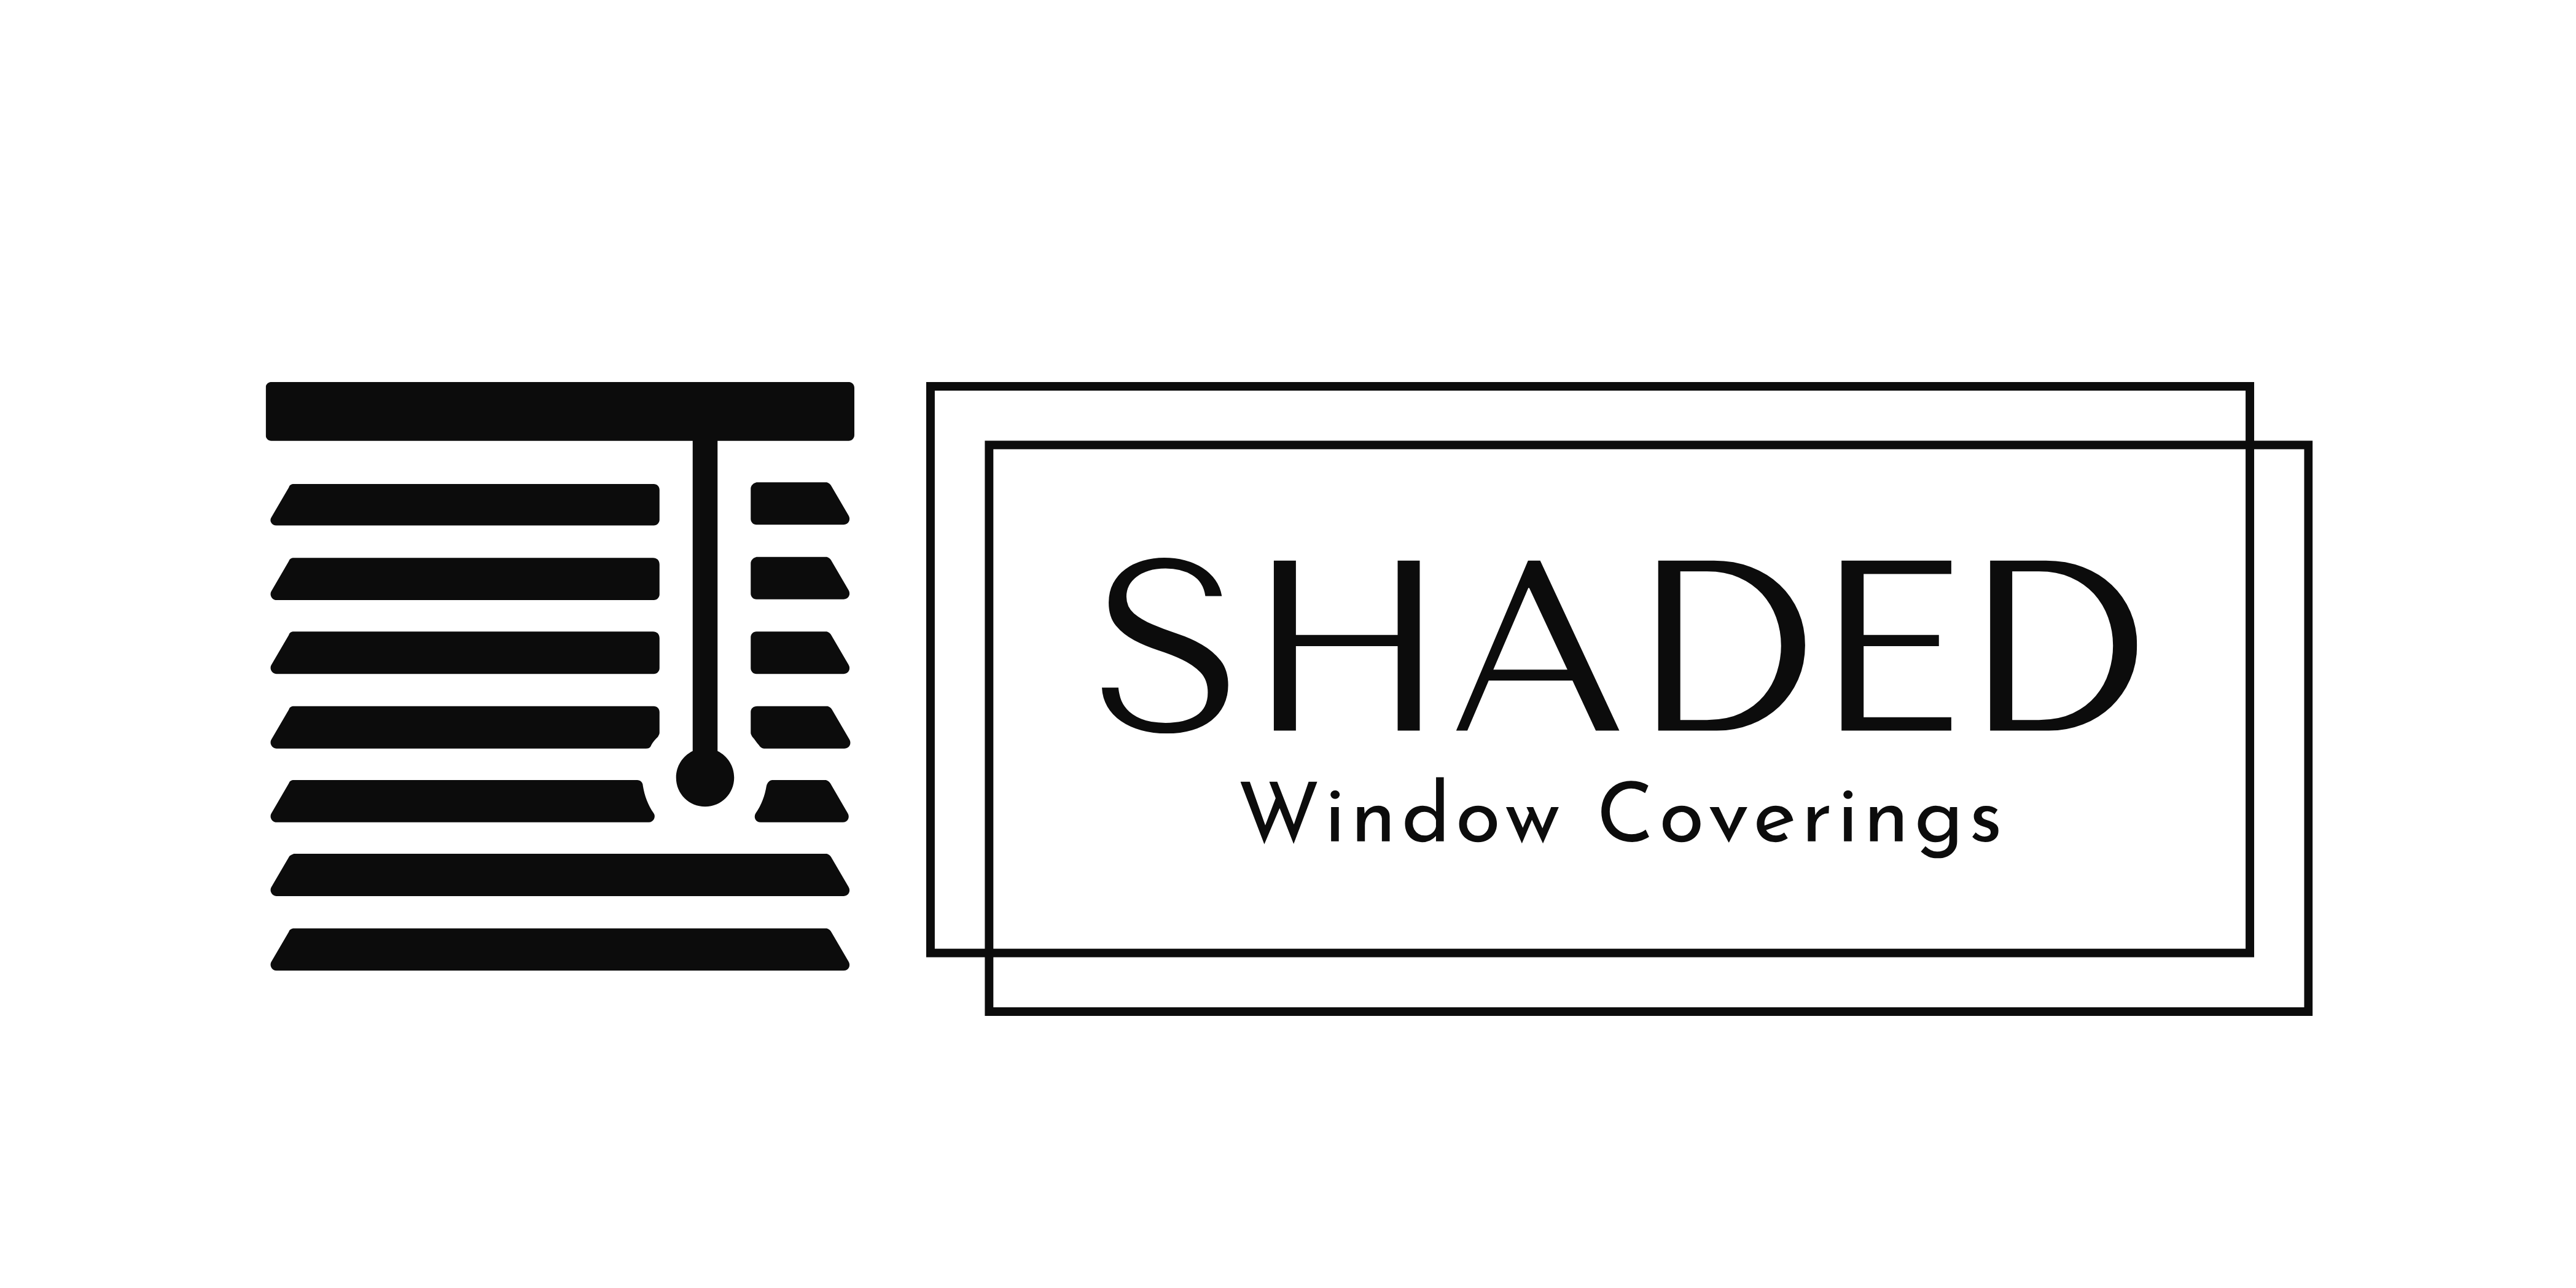 Shaded Window Coverings